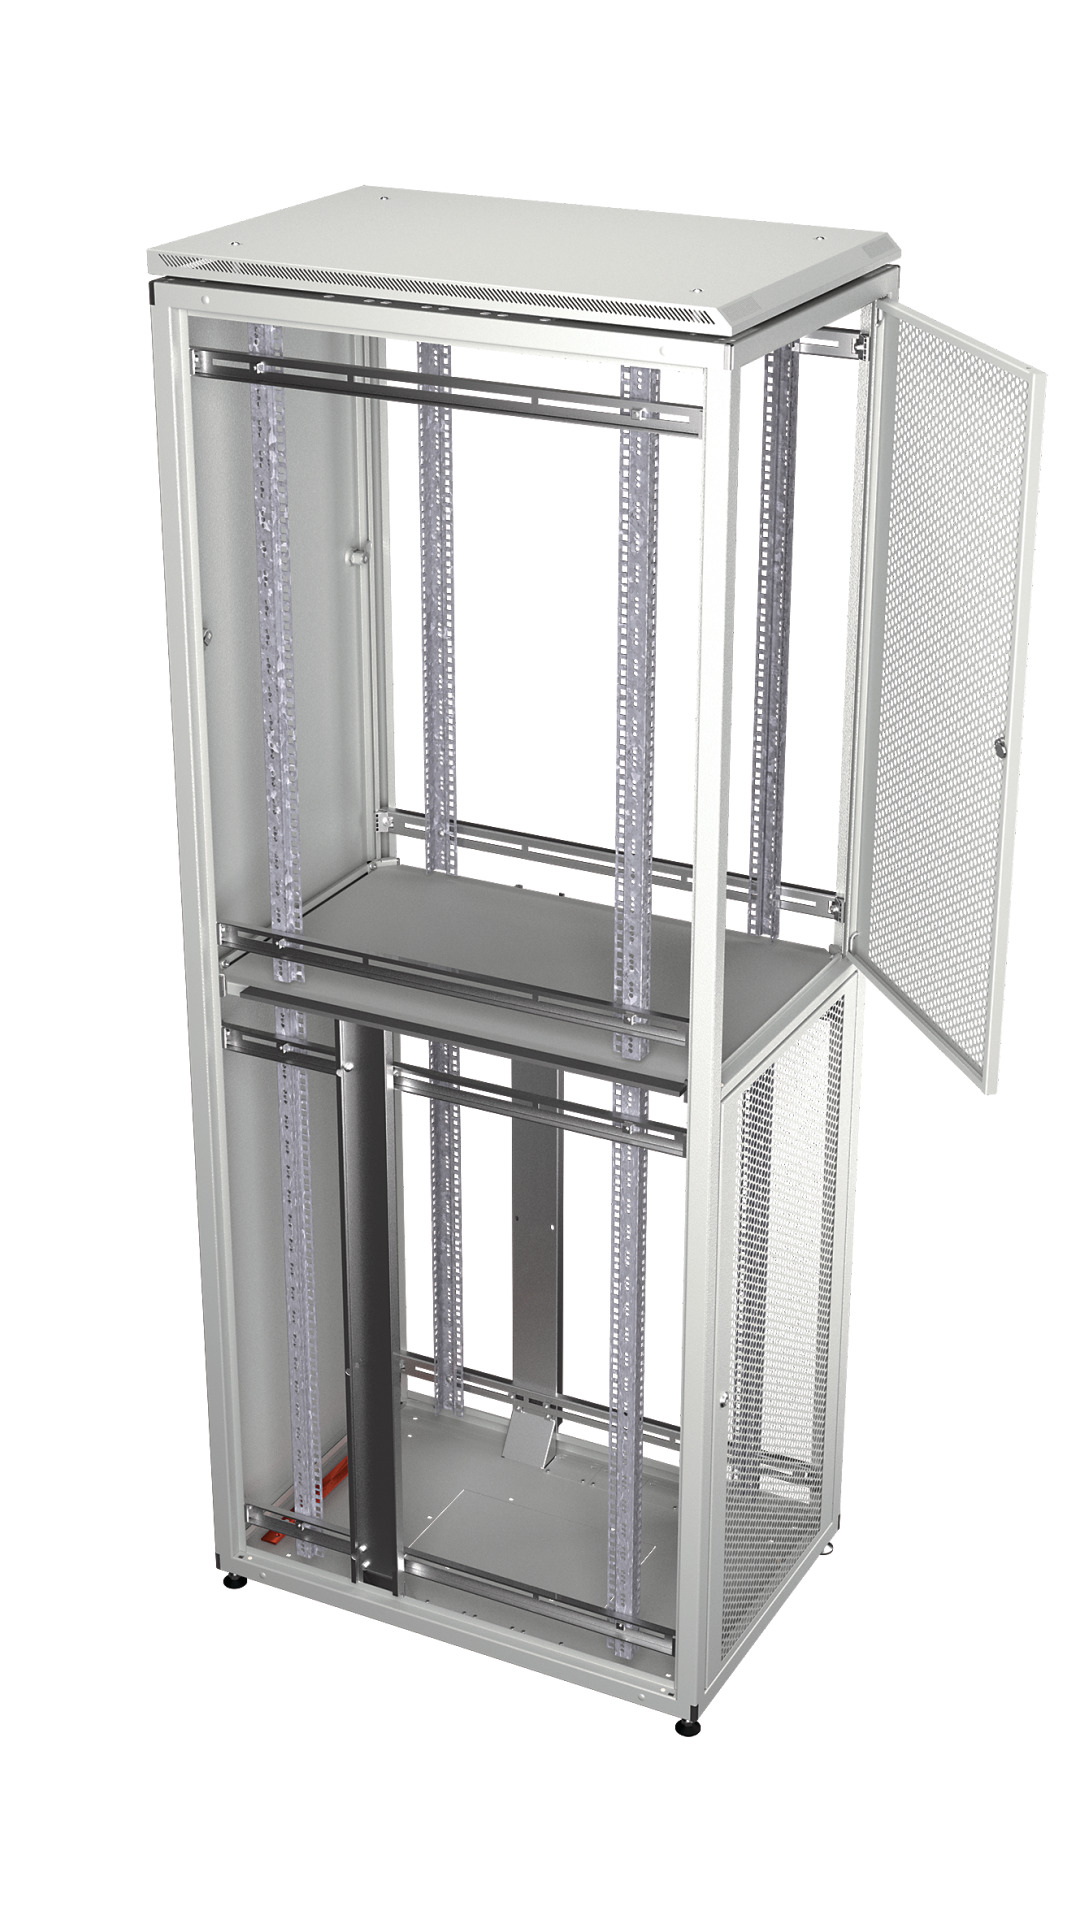 Co-Location Rack PRO, 2 x 23U, 600x1000 mm, F+R 1-Part Perforated, RAL7035